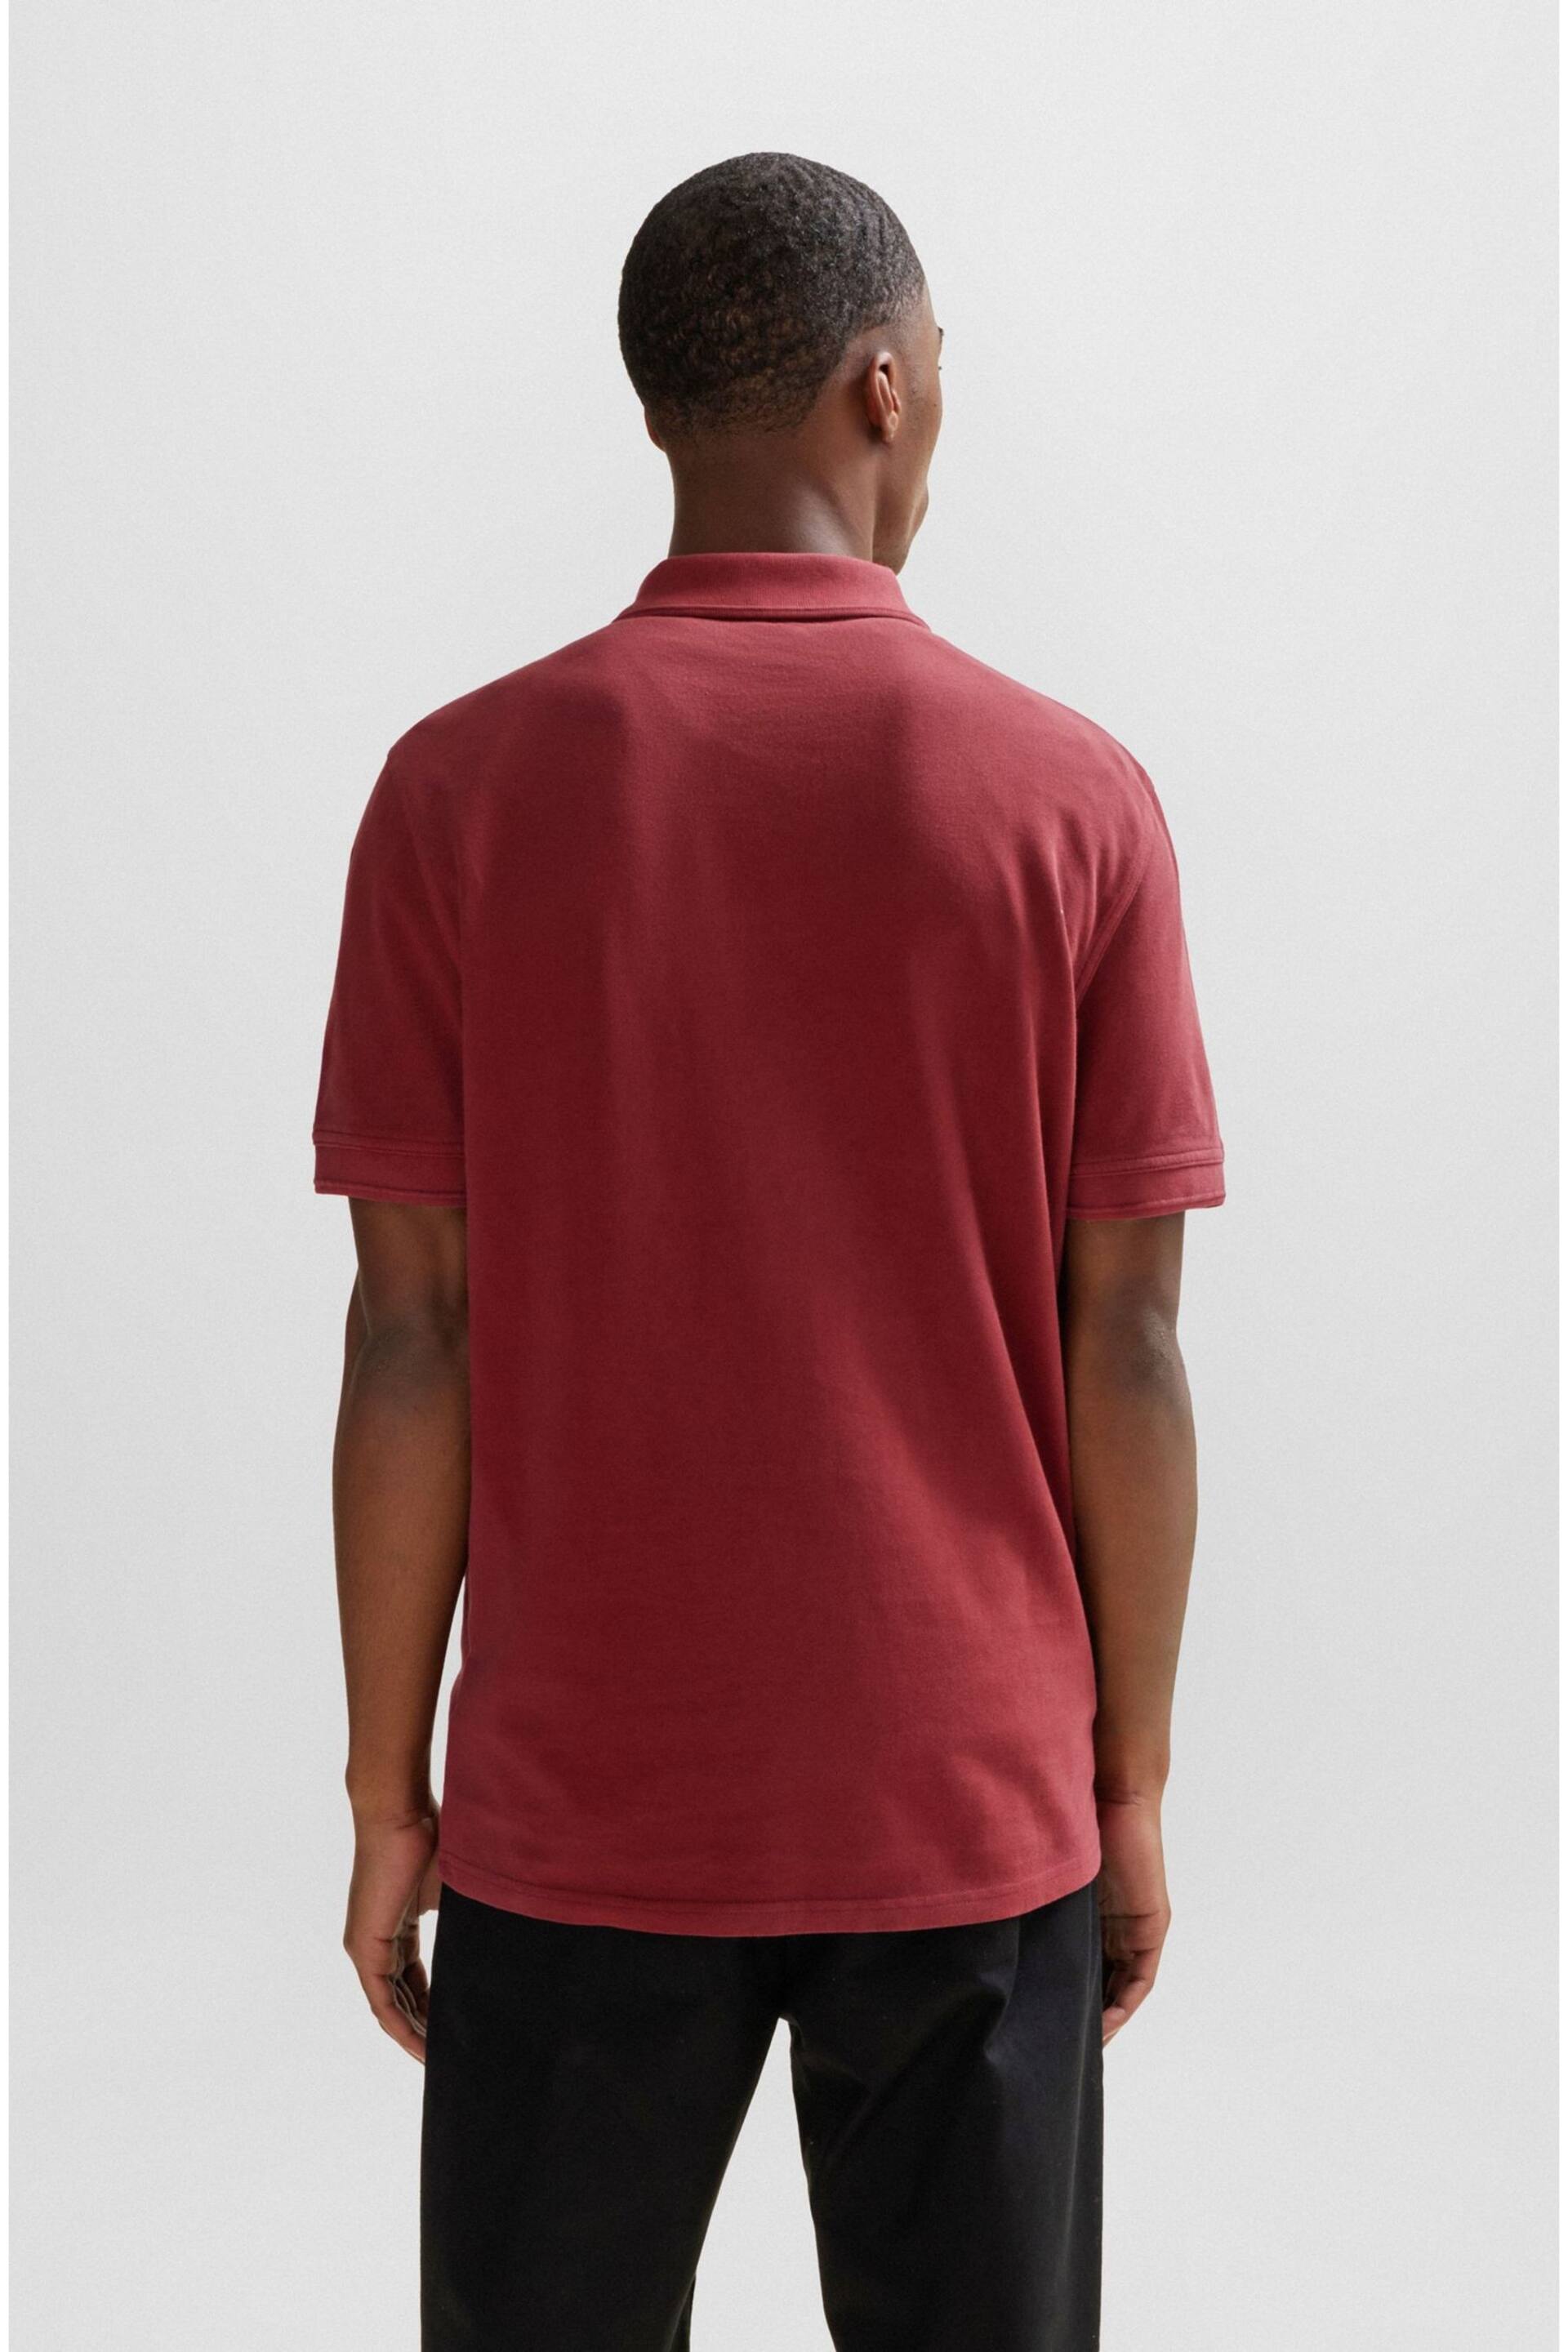 BOSS Red Cotton Pique Polo Shirt - Image 2 of 5